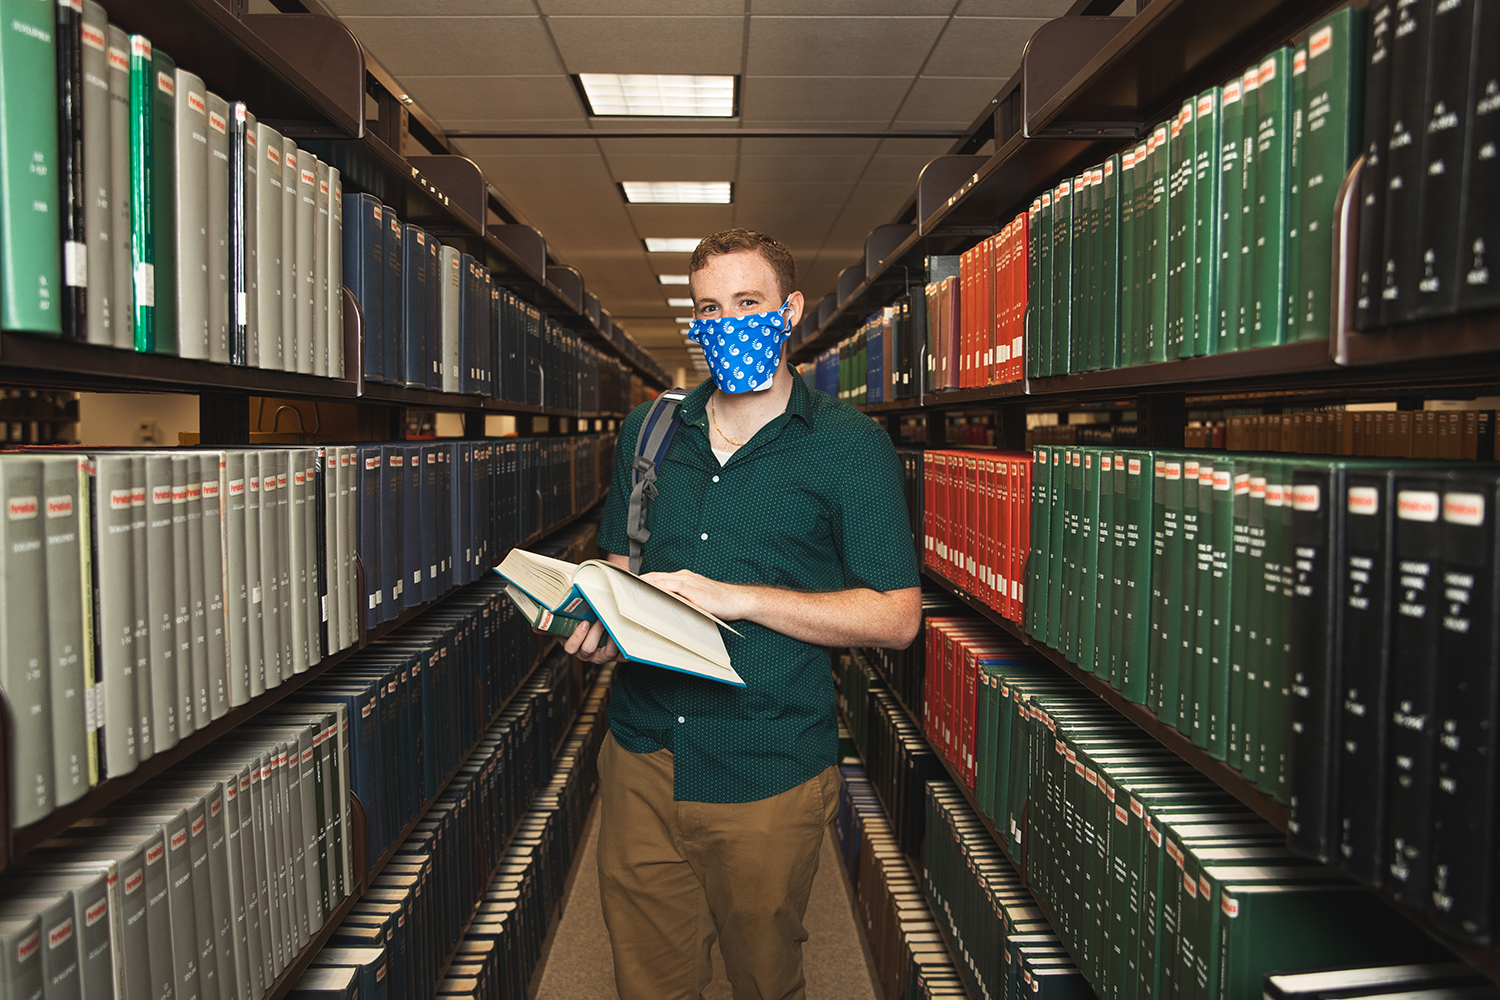 Theatre major Collin Crews wears face protection on the UWF campus on July 8, 2020.